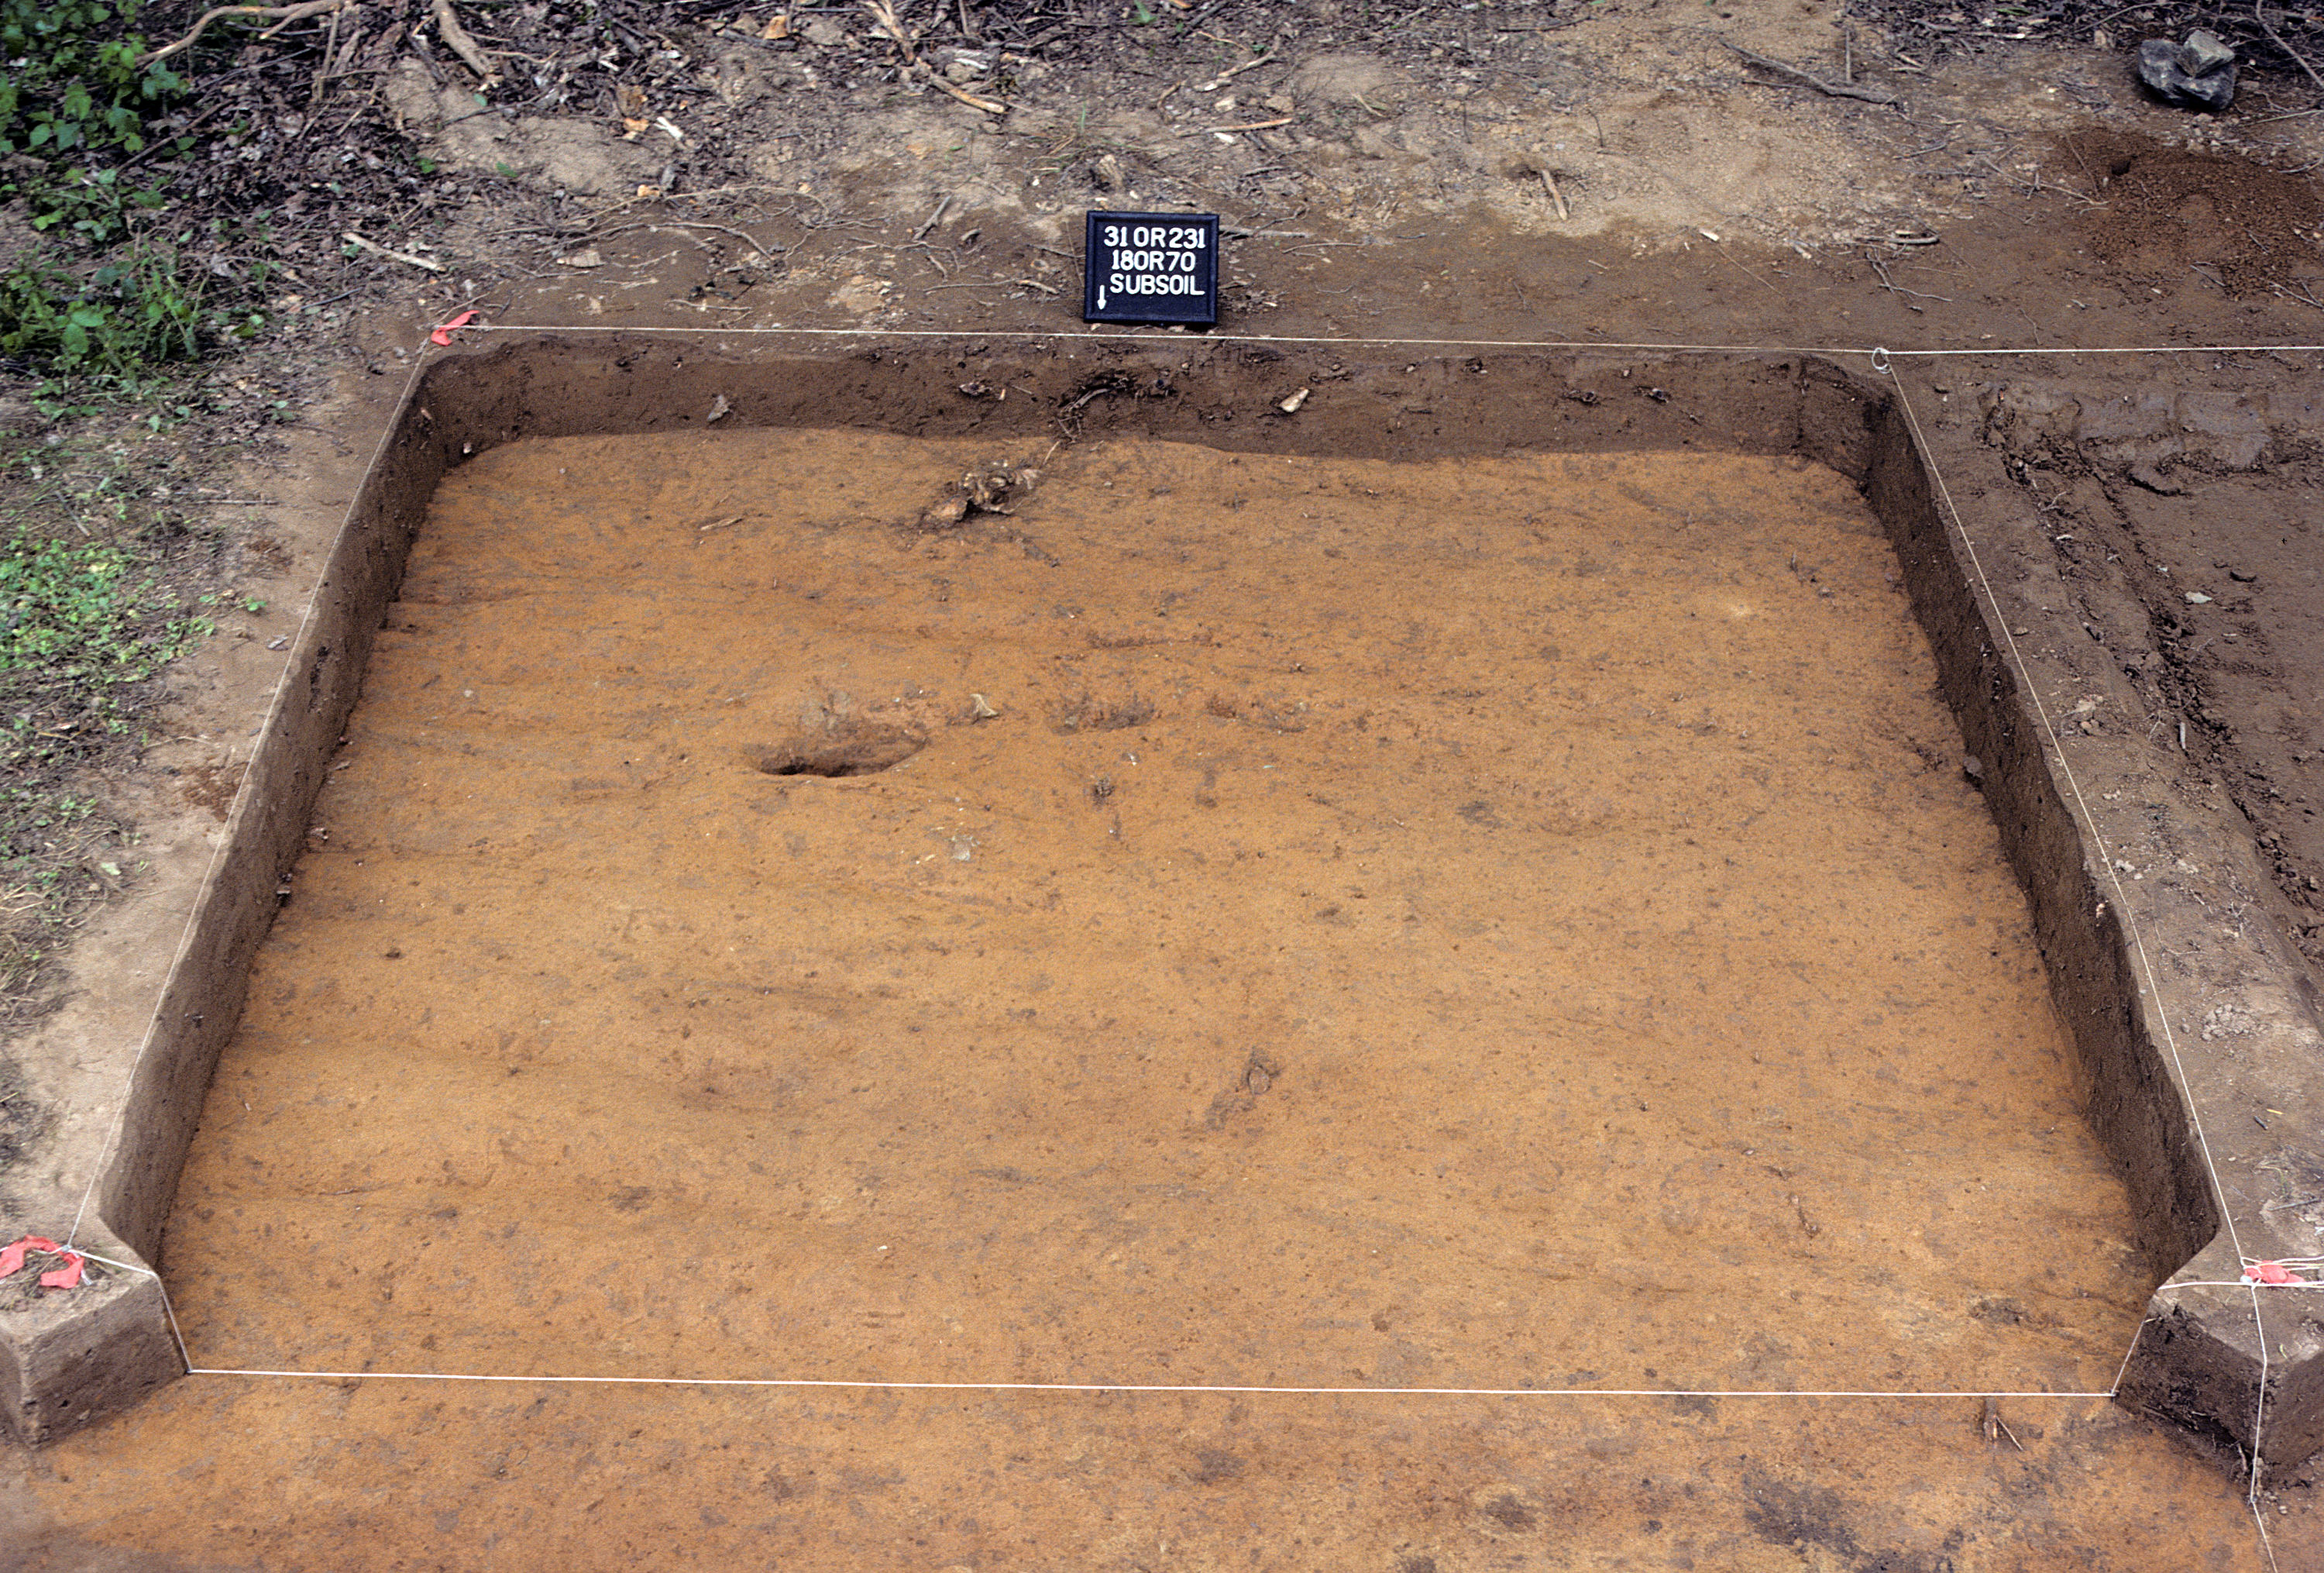 Figure 724. Sq. 180R70 at top of subsoil (view to south).